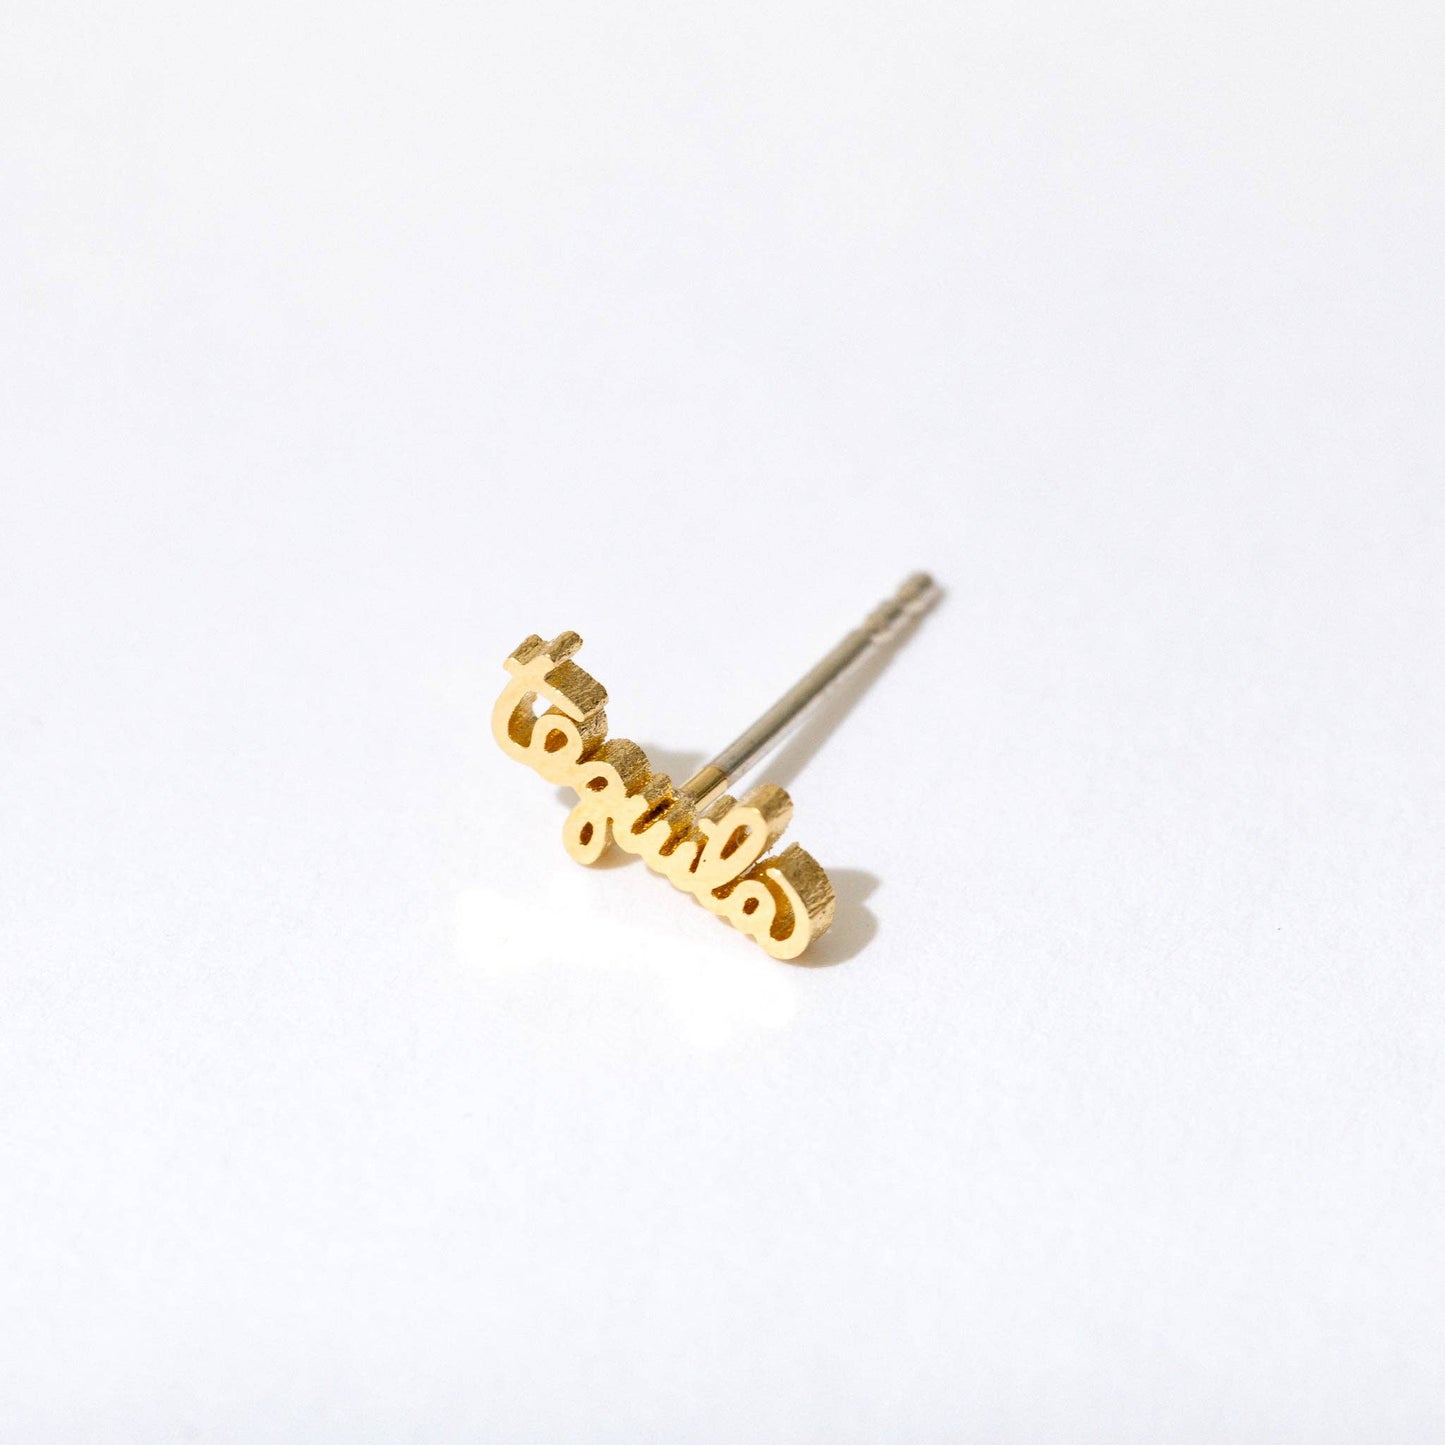 Single stud earring -- 14k gold plated text in script writing that reads "tequila" 